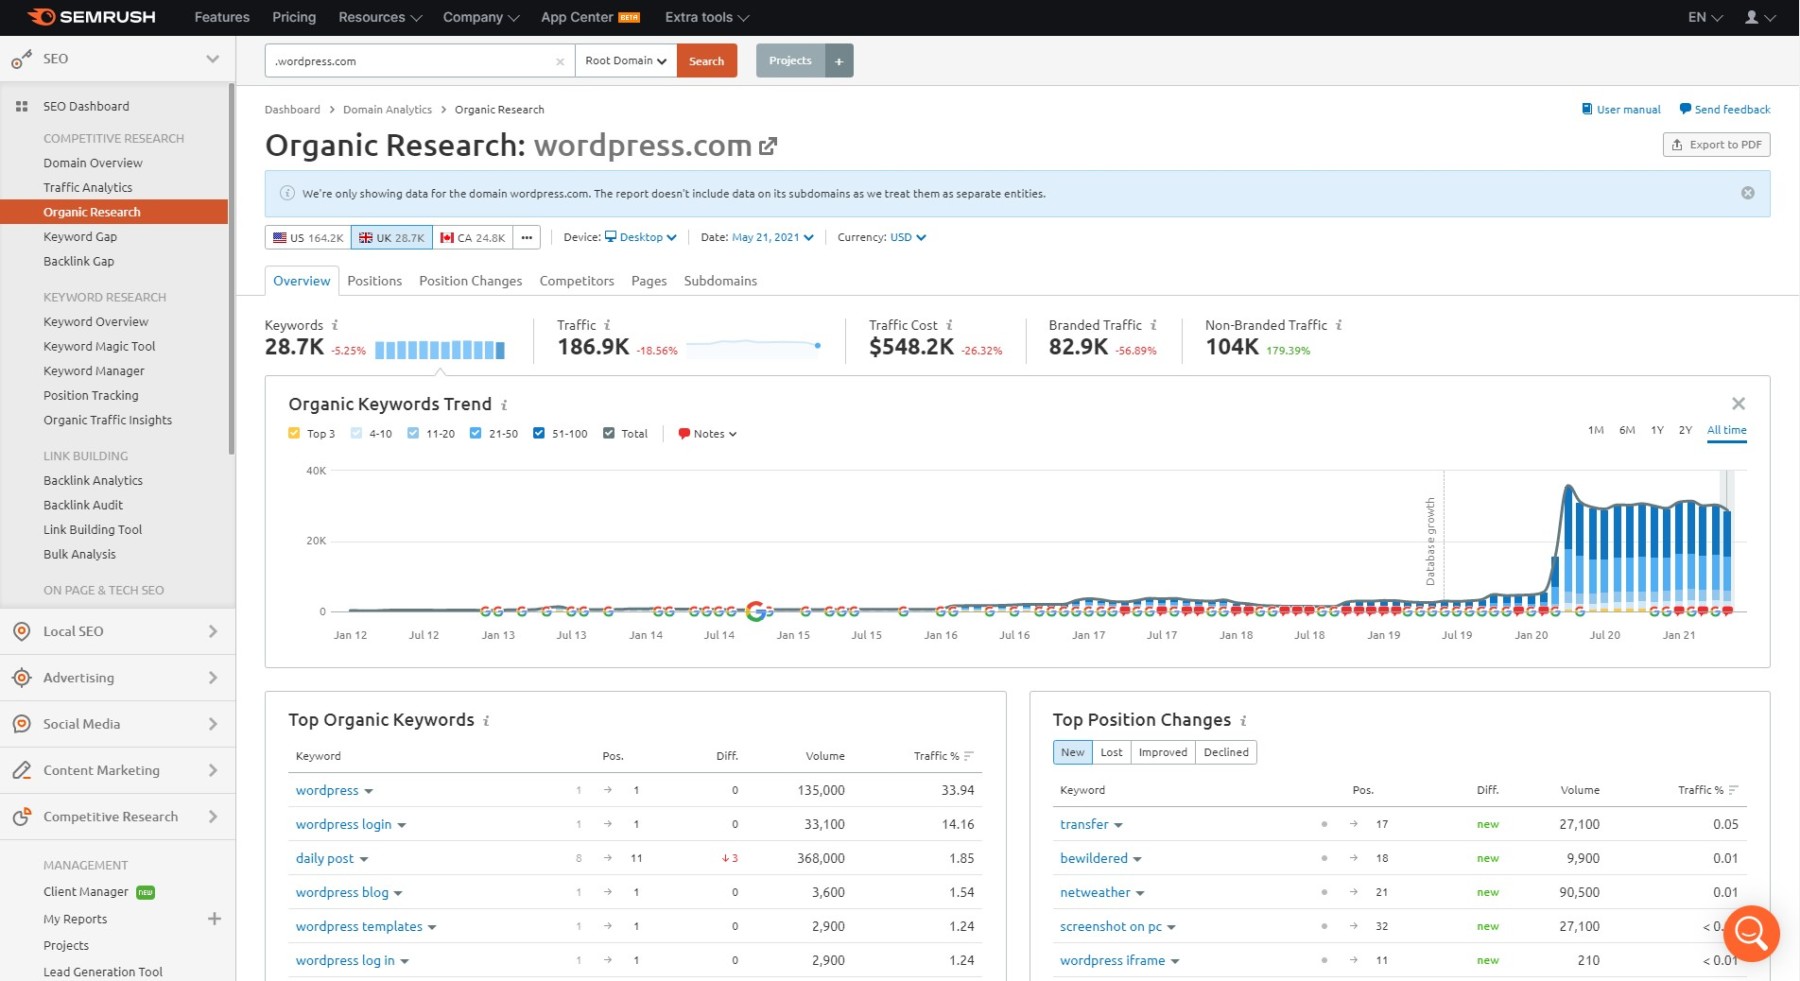 SEMrush organic research tool overview